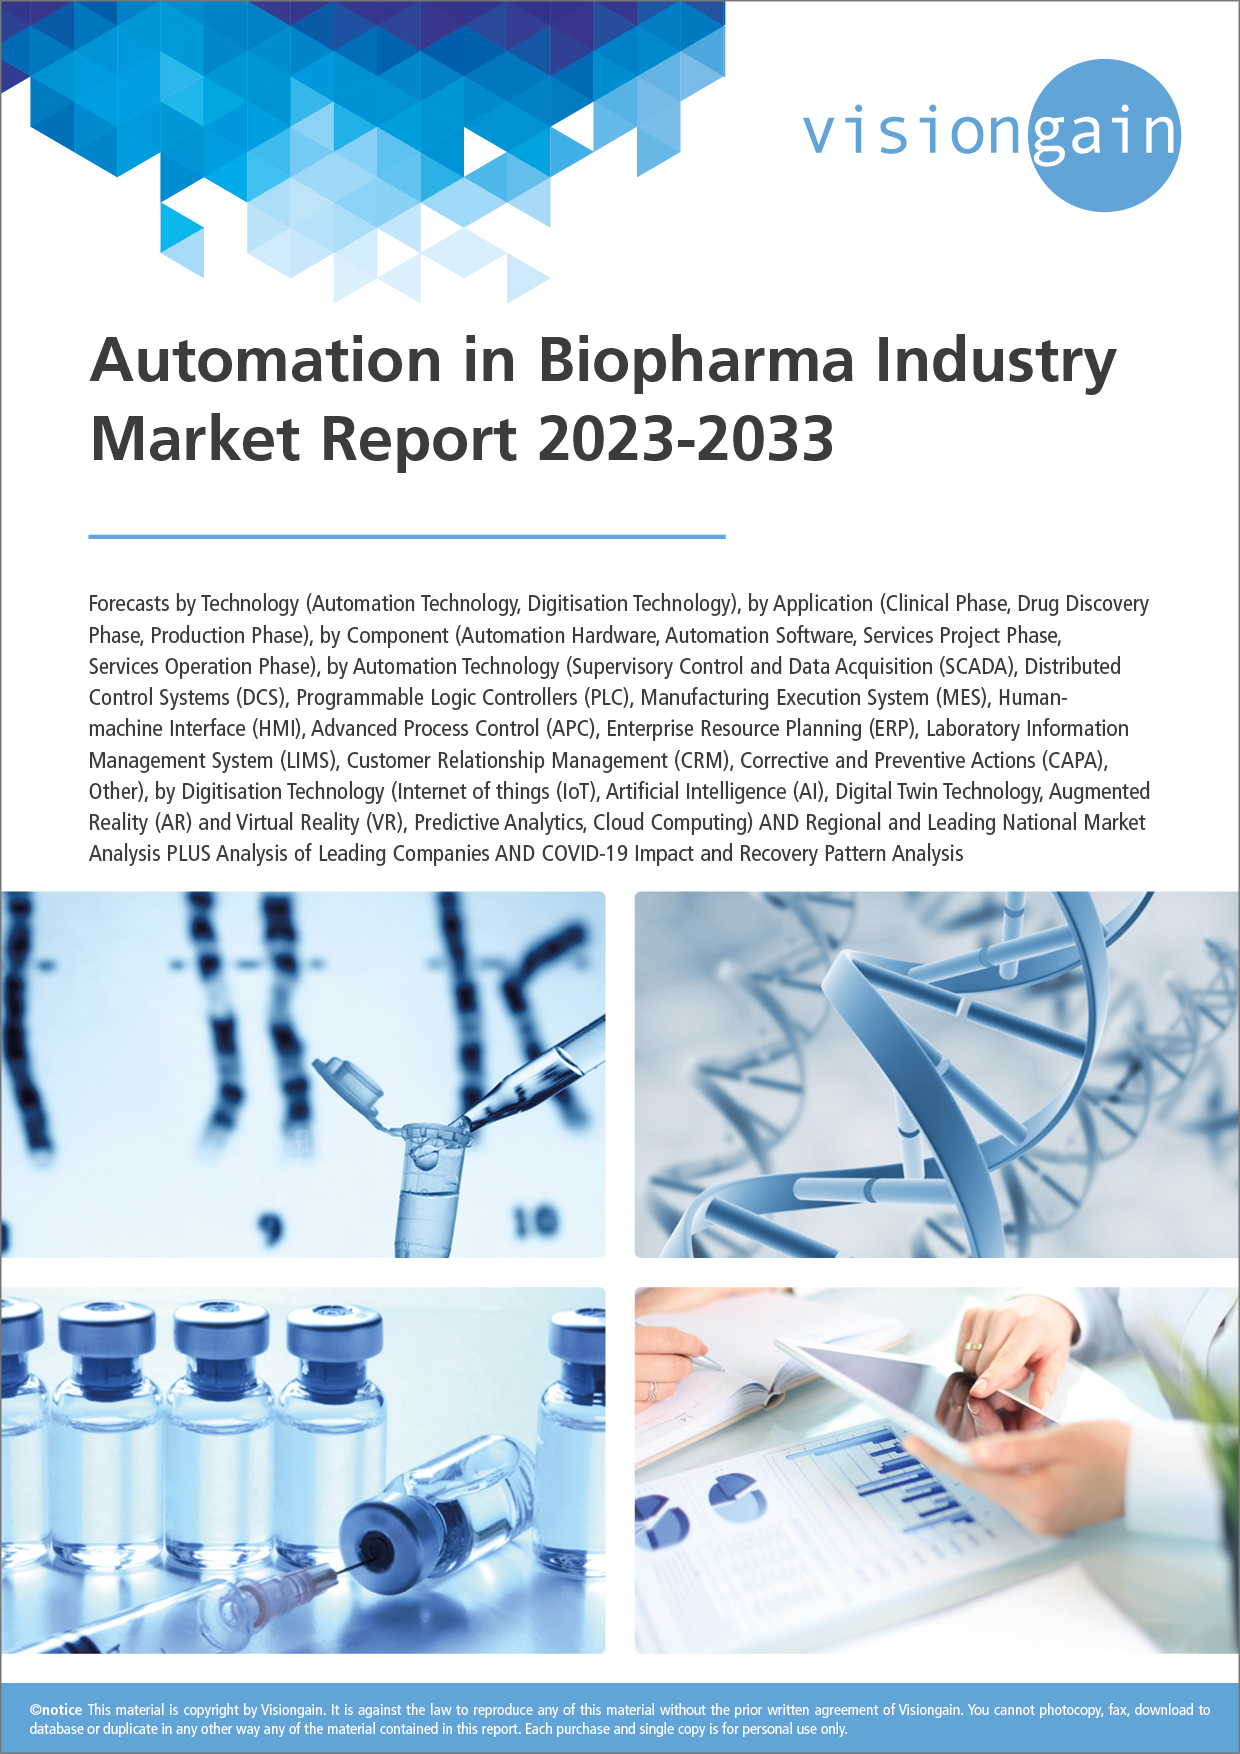 Automation in Biopharma Industry Market Report 2023-2033